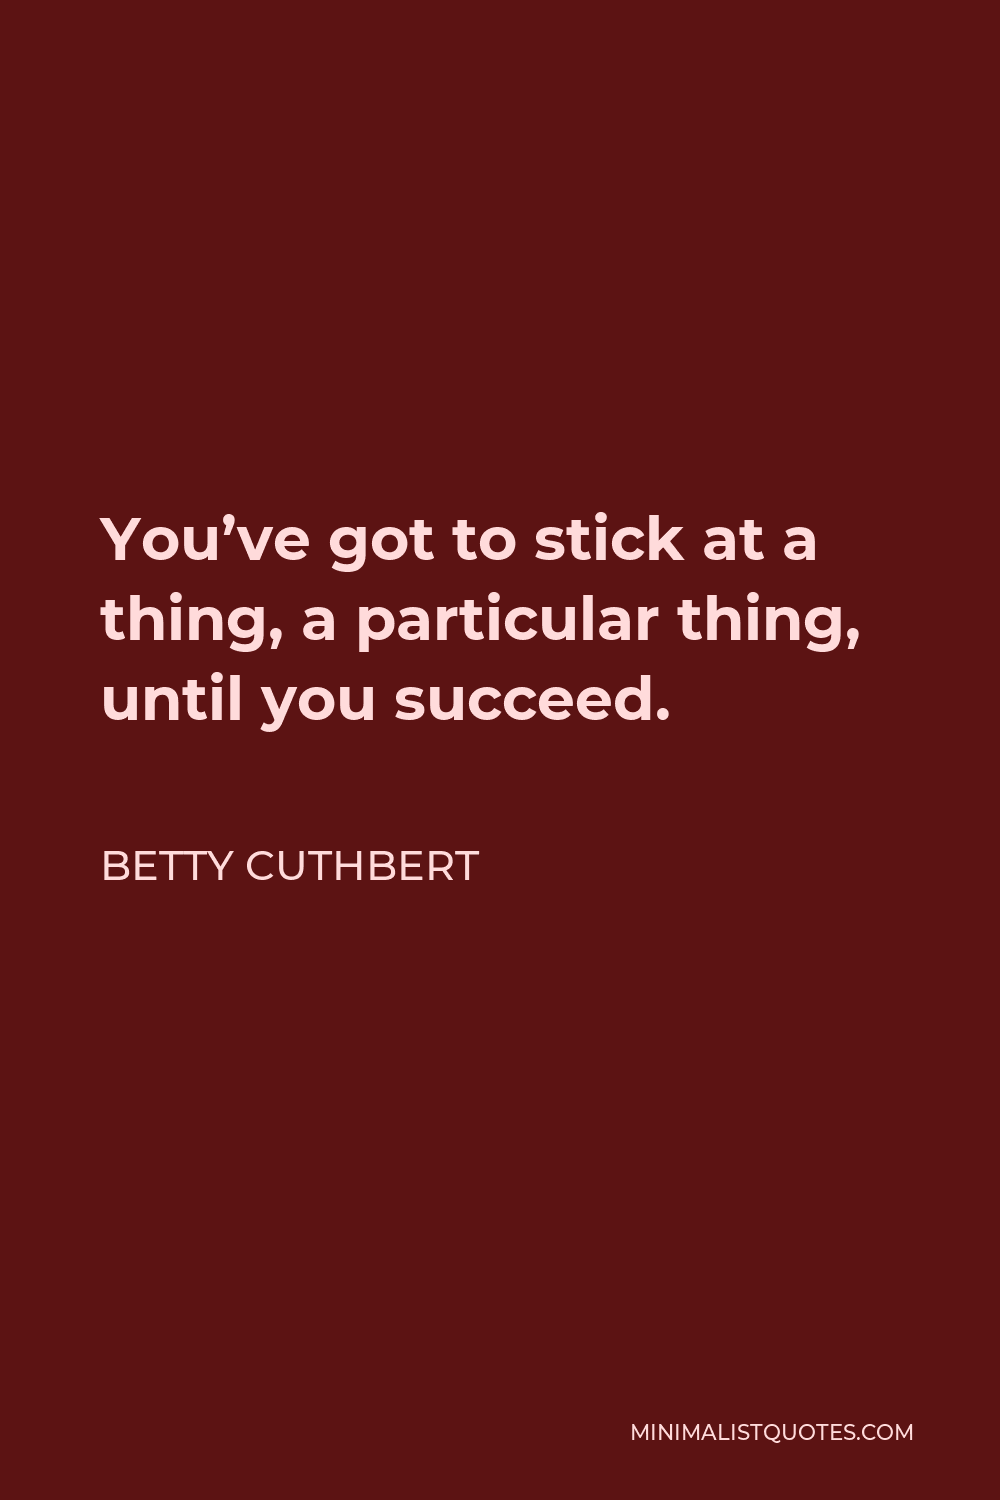 Betty Cuthbert Quote - You’ve got to stick at a thing, a particular thing, until you succeed.